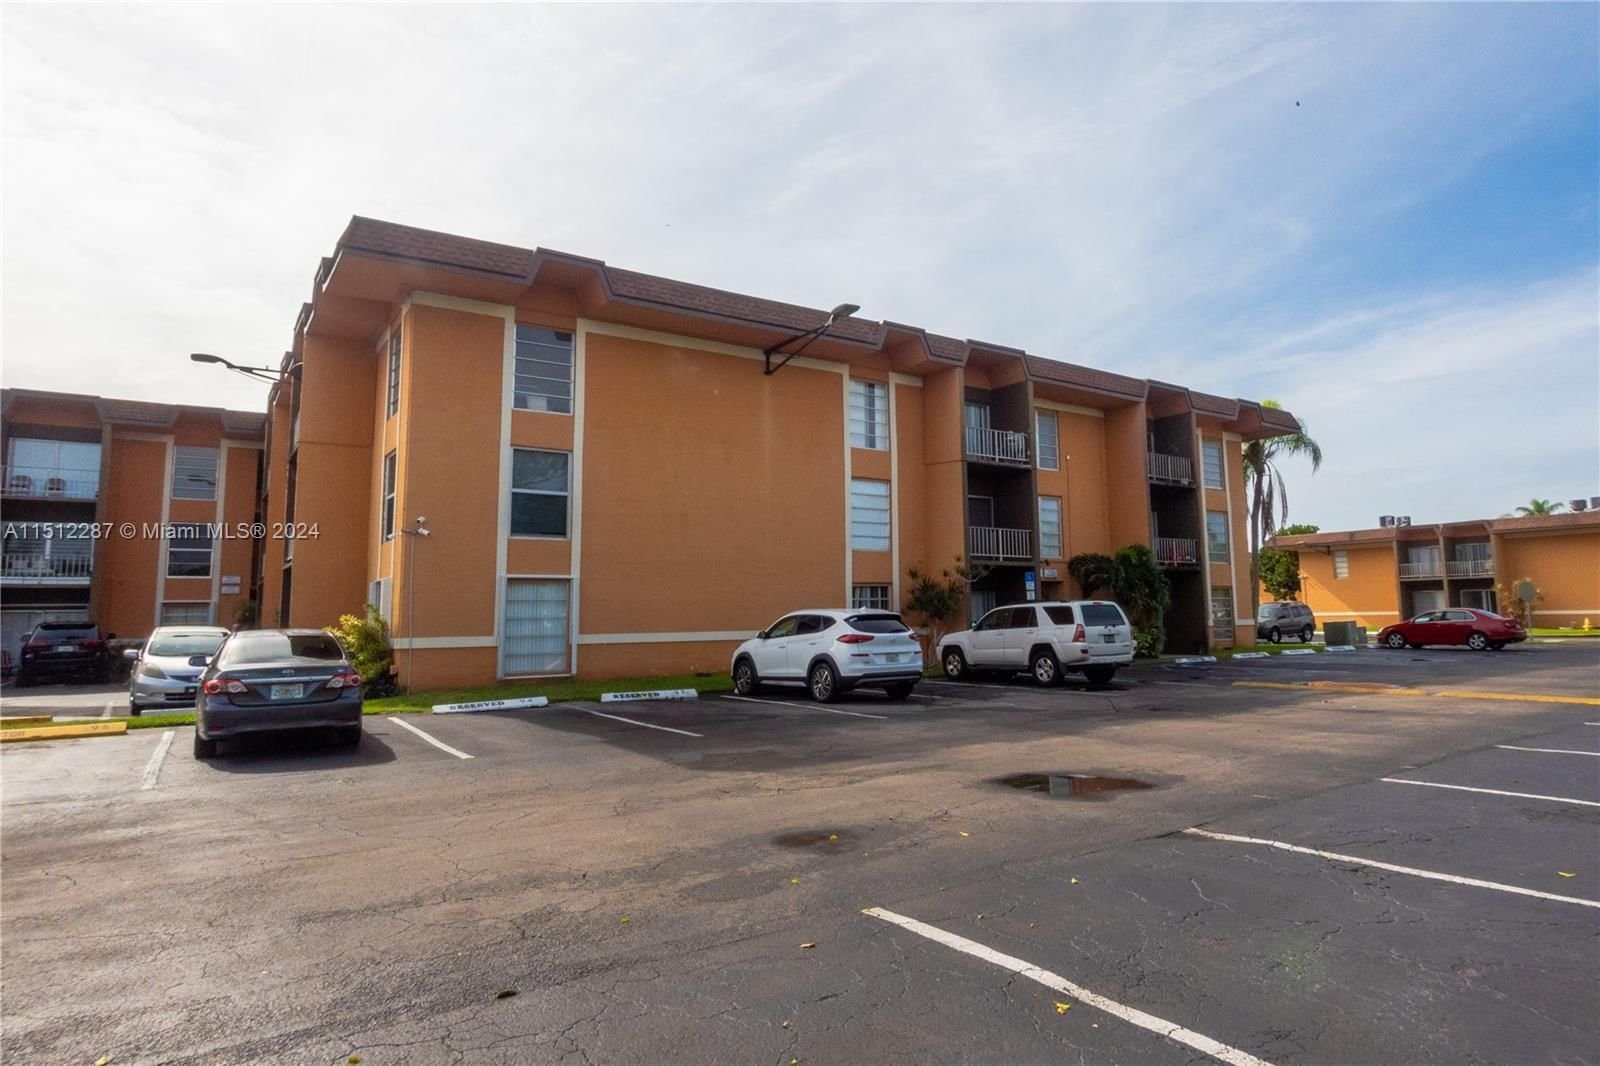 Real estate property located at 9405 76th St Y11, Miami-Dade County, SUNSET PALMS EAST CONDO, Miami, FL